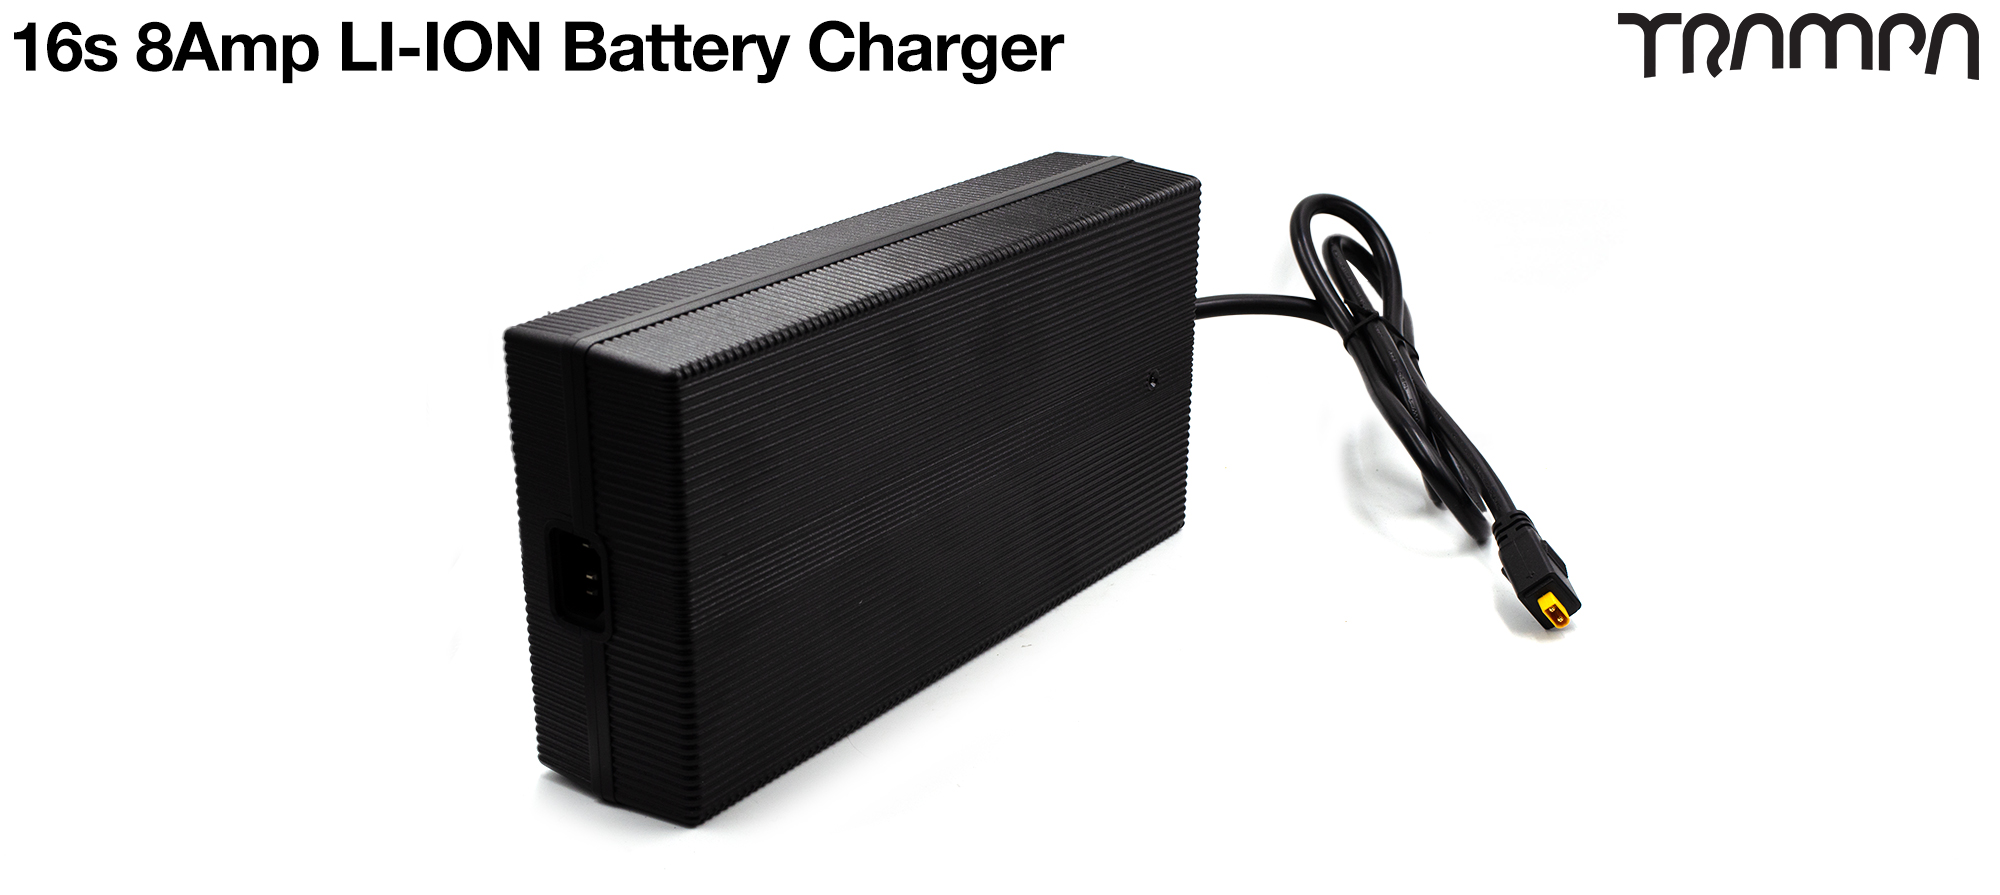 YES - Please supply an 8A 16s Li-ion Charger 